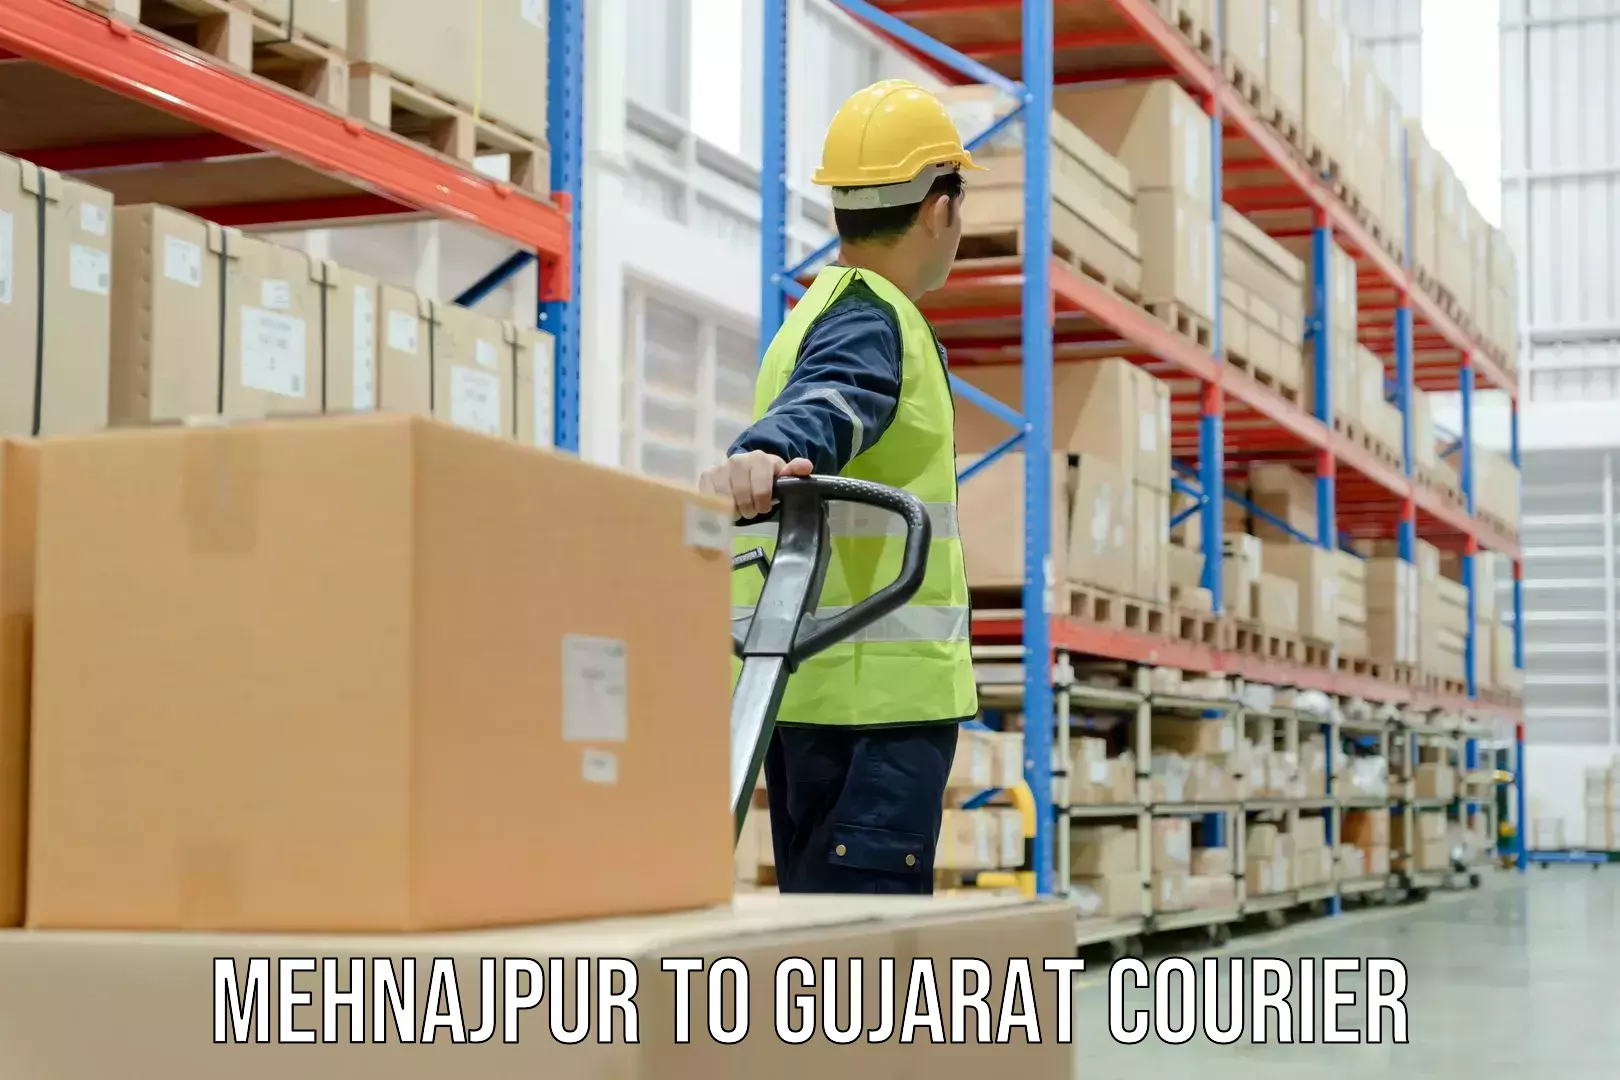 Quality courier partnerships Mehnajpur to Gujarat